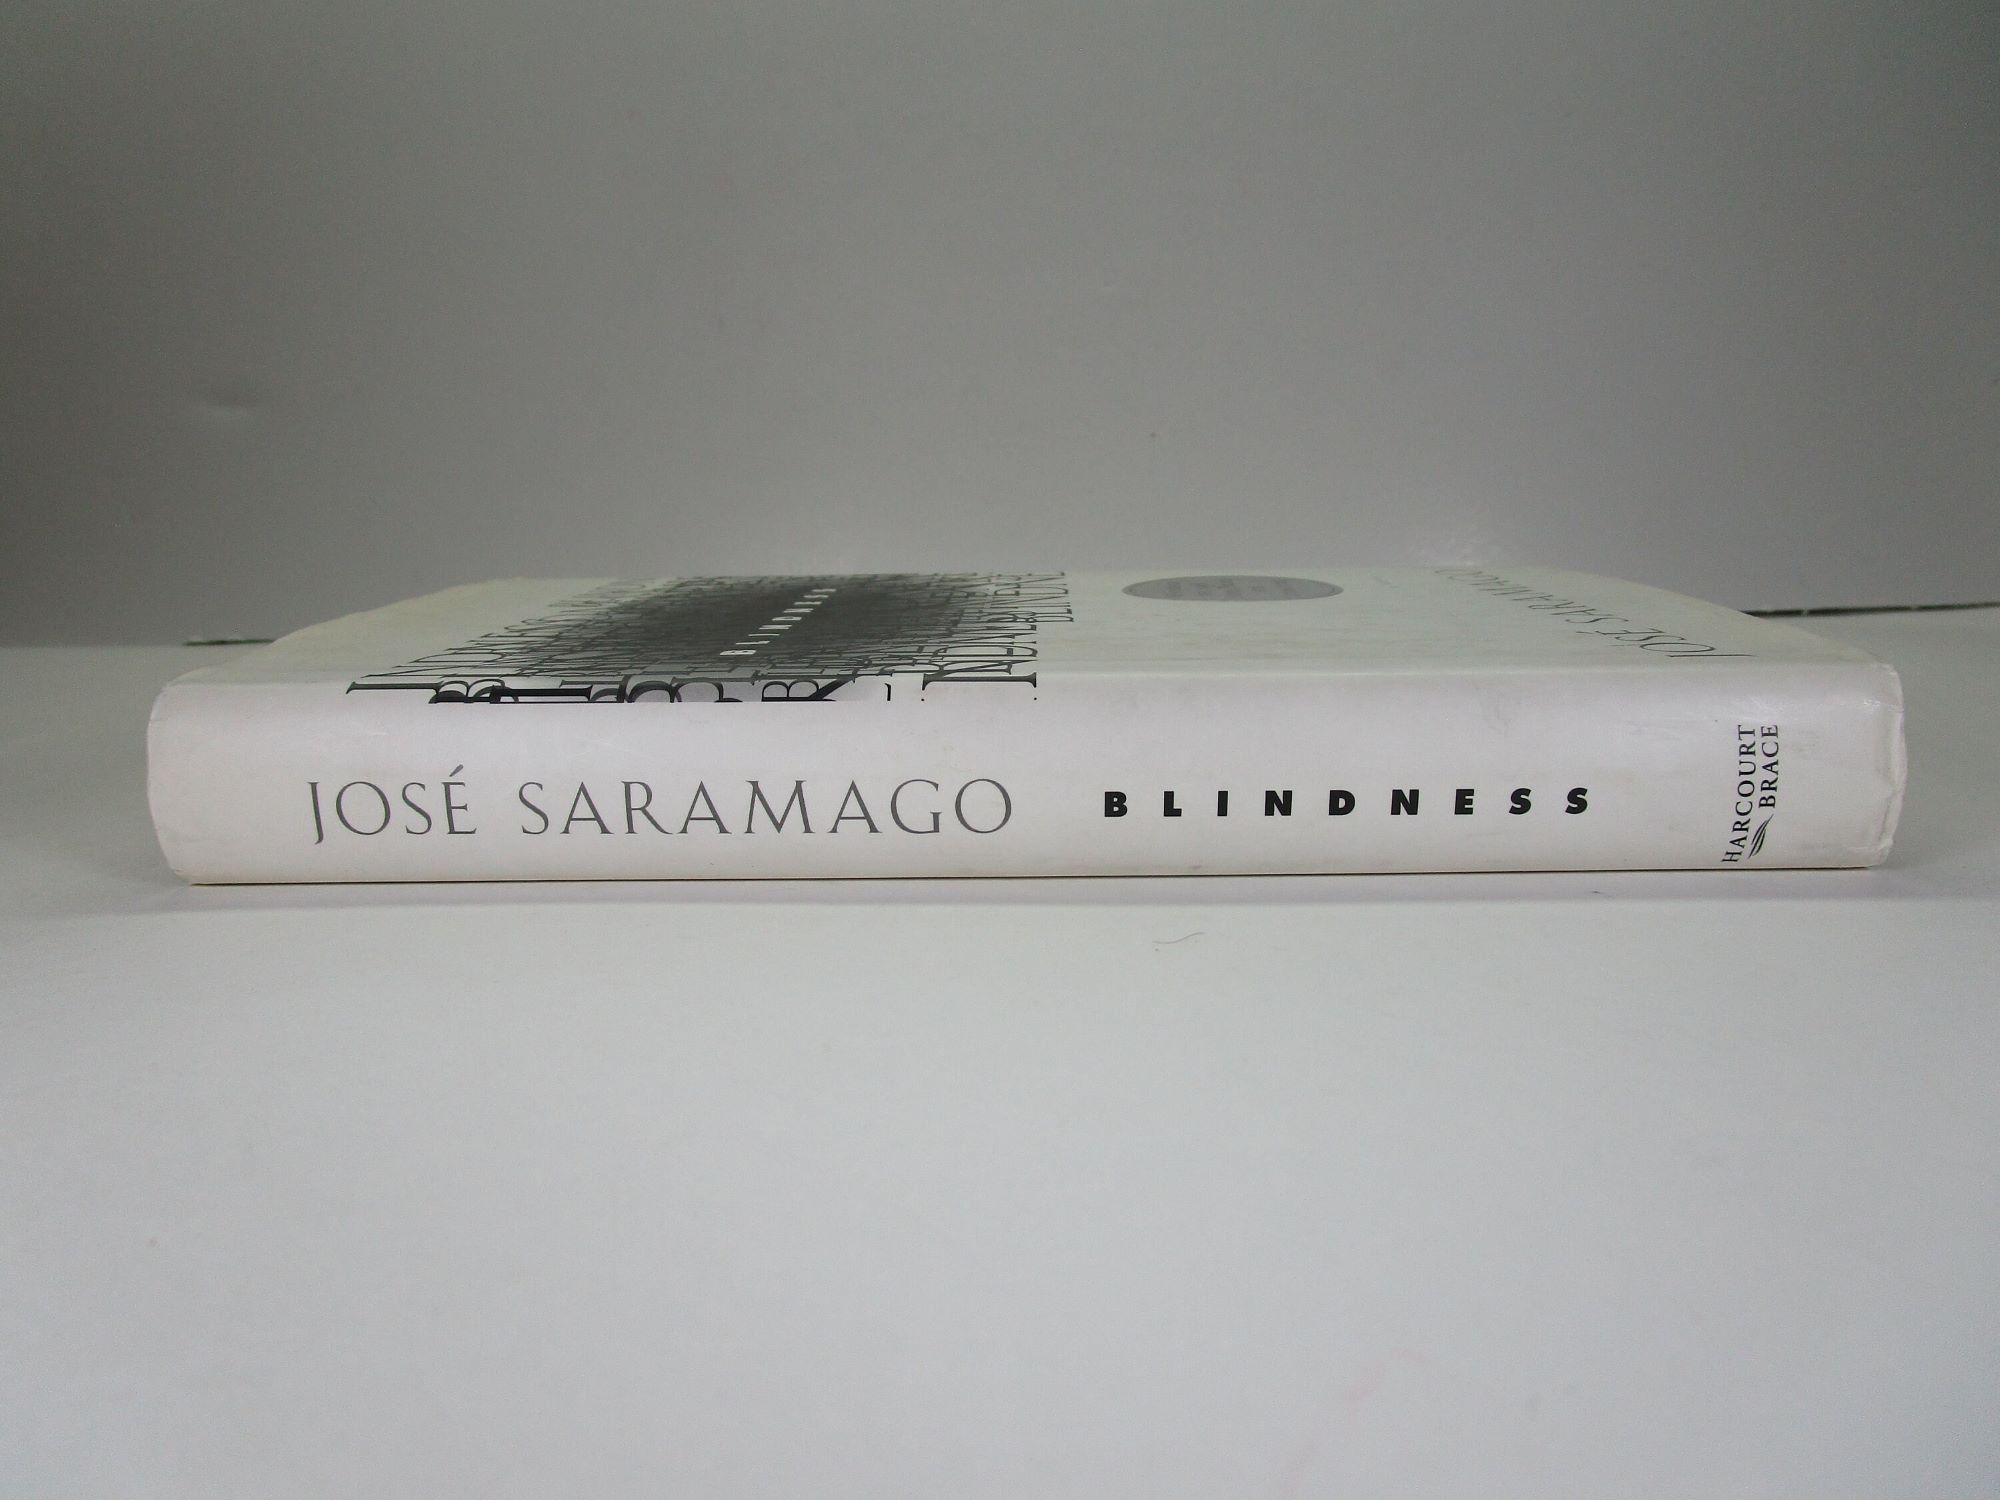 14-enigmatic-facts-about-blindness-jose-saramago